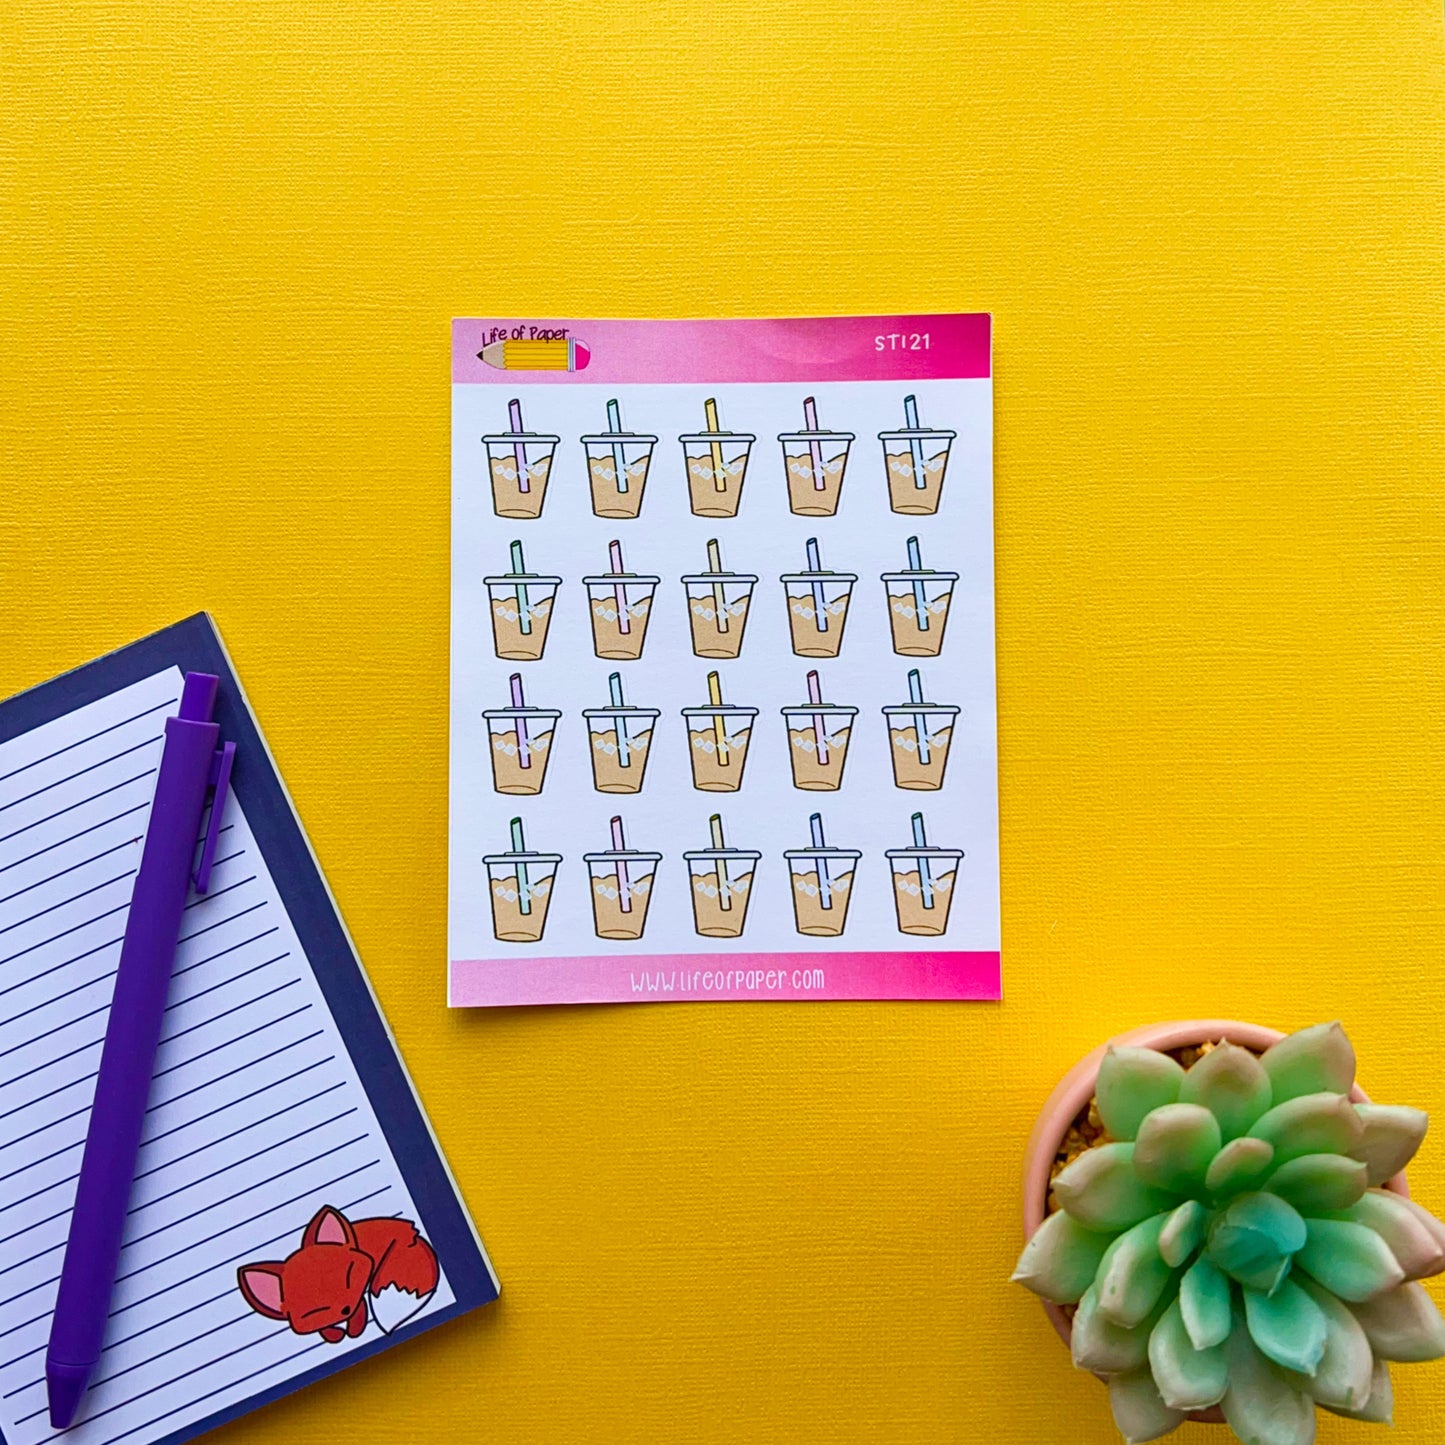 A notepad with Iced Coffee Planner Stickers is on a bright yellow surface. Next to the notepad is a lined notebook with a purple pen resting on it and a small drawing of a fox in the corner. A green succulent plant is partially visible on the right.